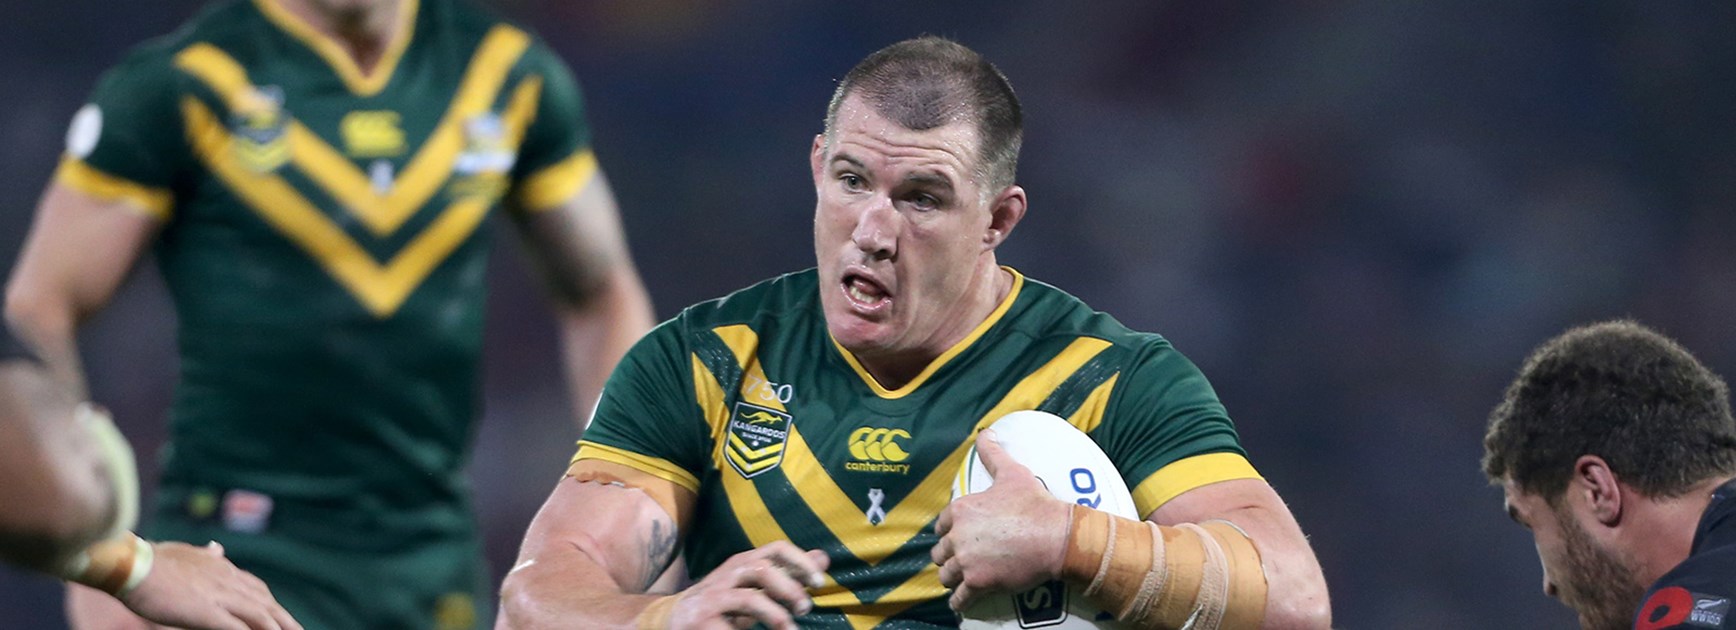 Kangaroos forward Paul Gallen was named man of the match in the Downer Test against New Zealand.